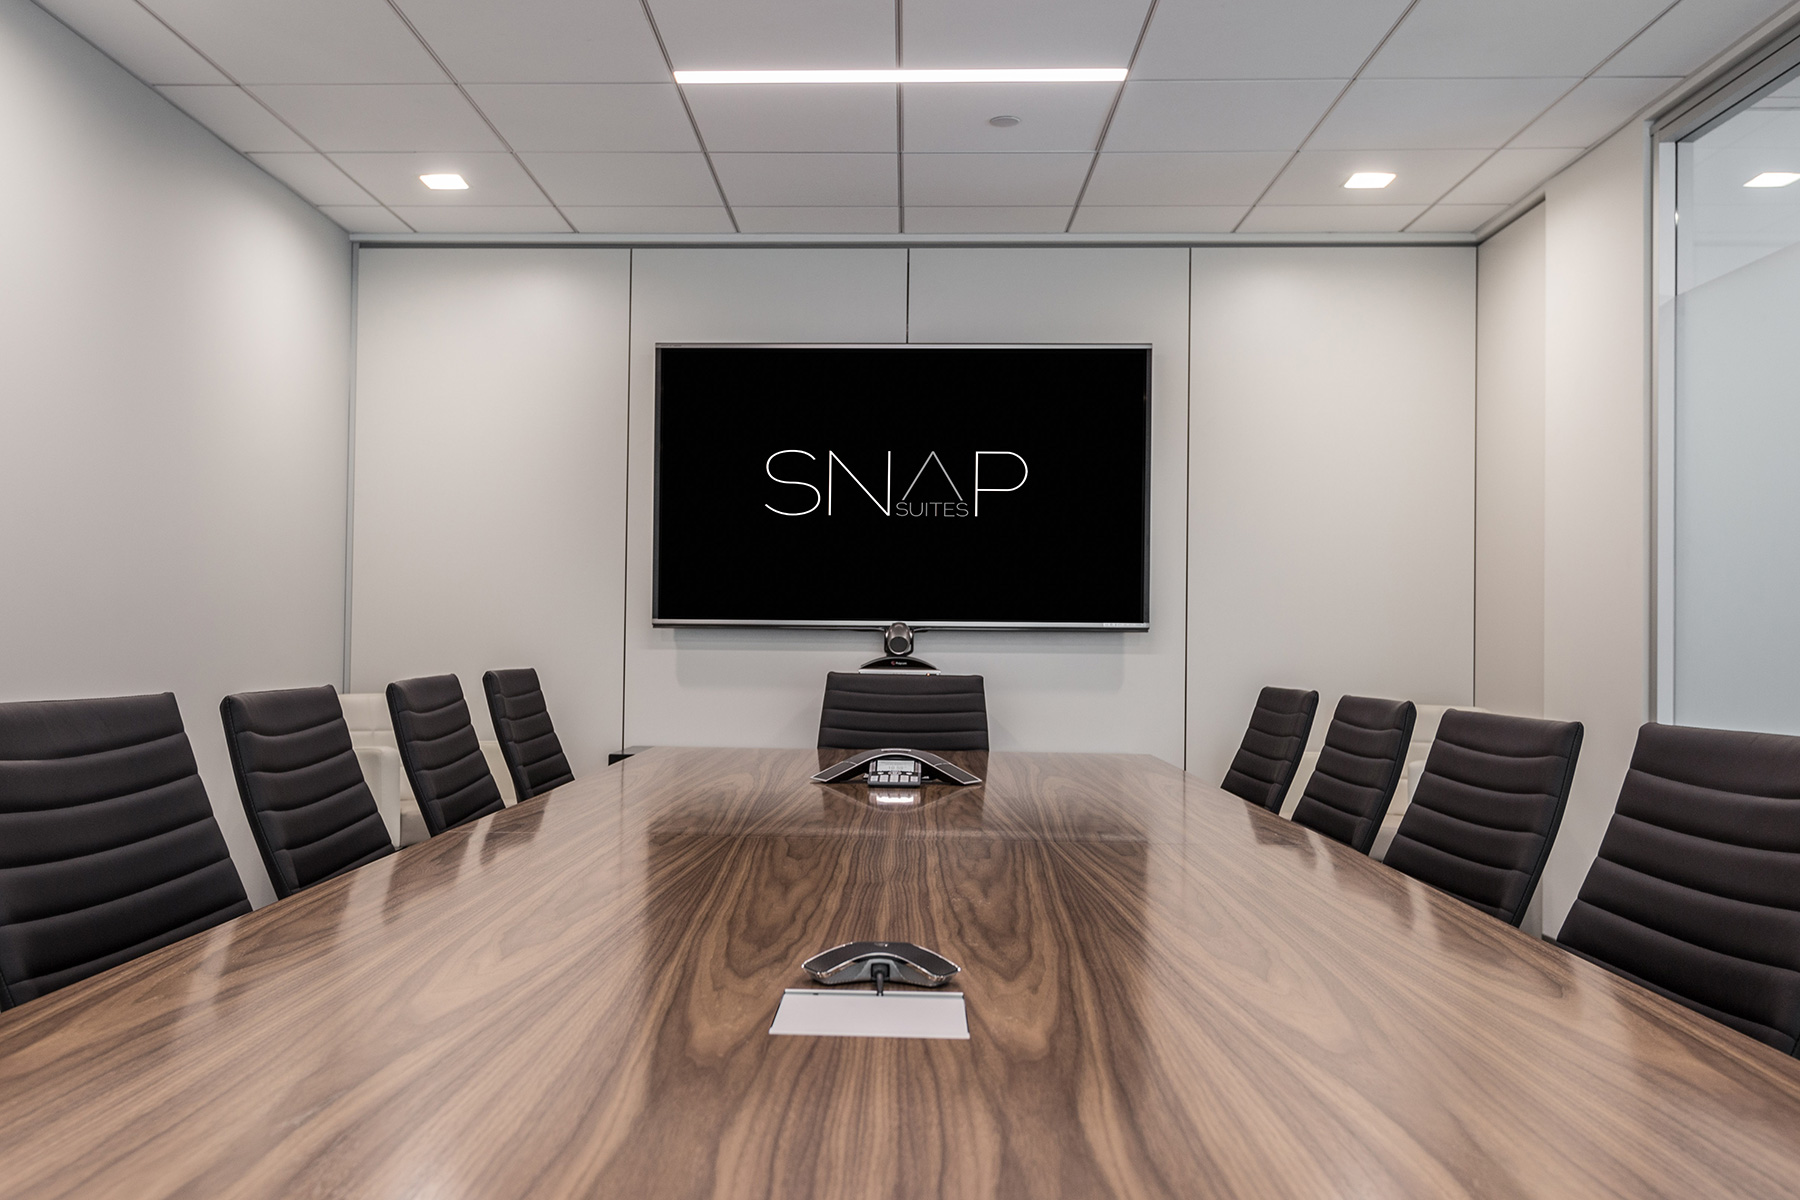 Snapsuites conference room with television